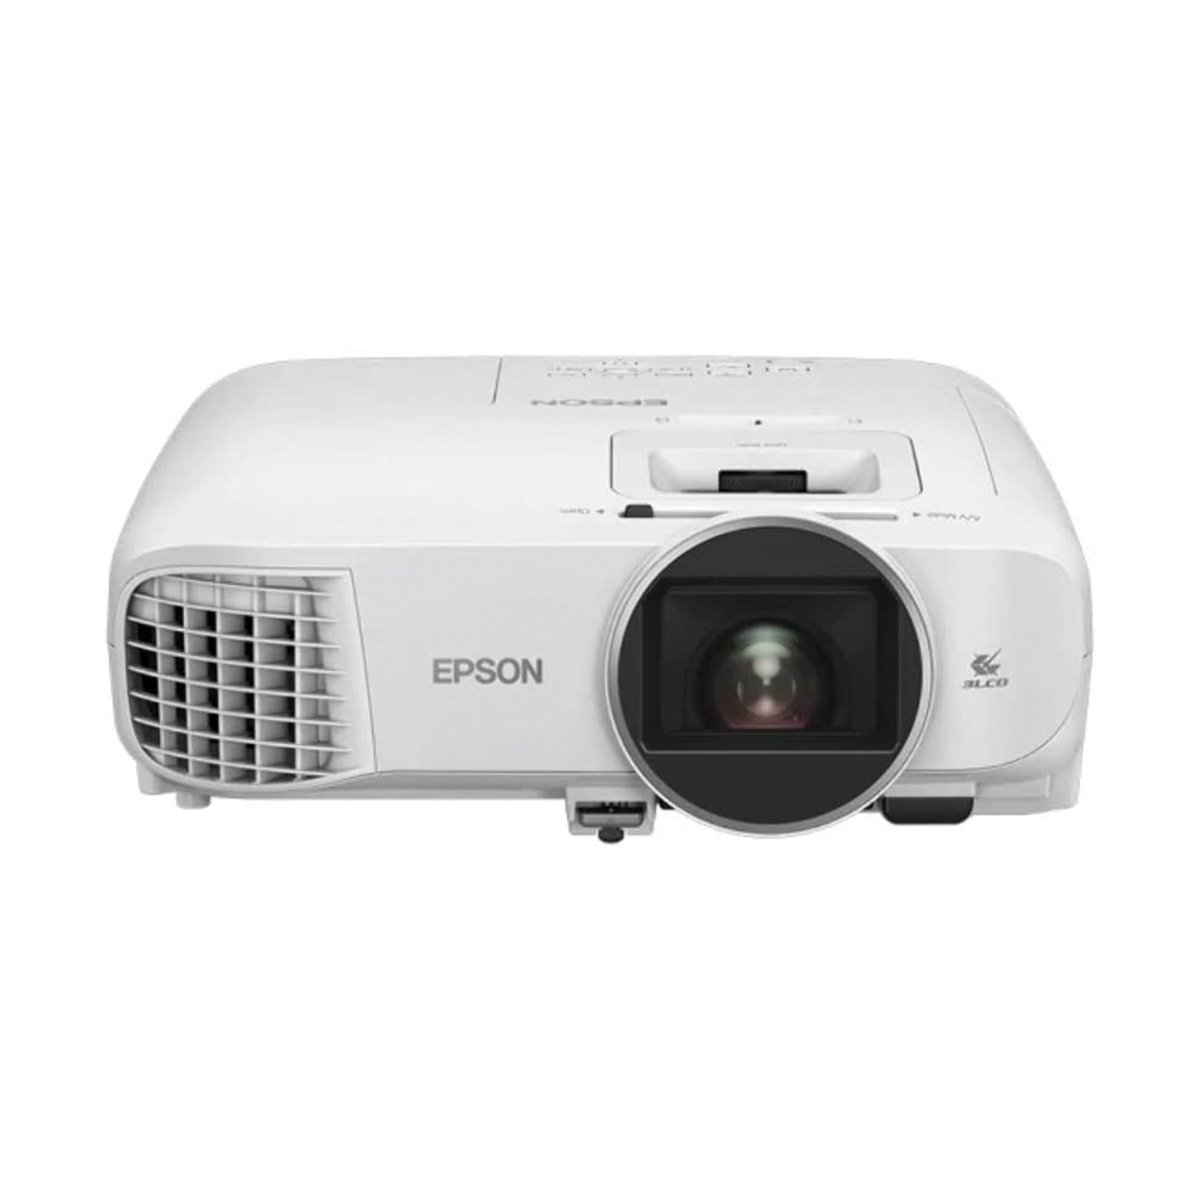 Epson EH-TW5600 3LCD, Full HD, 2500 Lumens, 300 Inch Display, Lens Shift, Home Cinema Projector  White